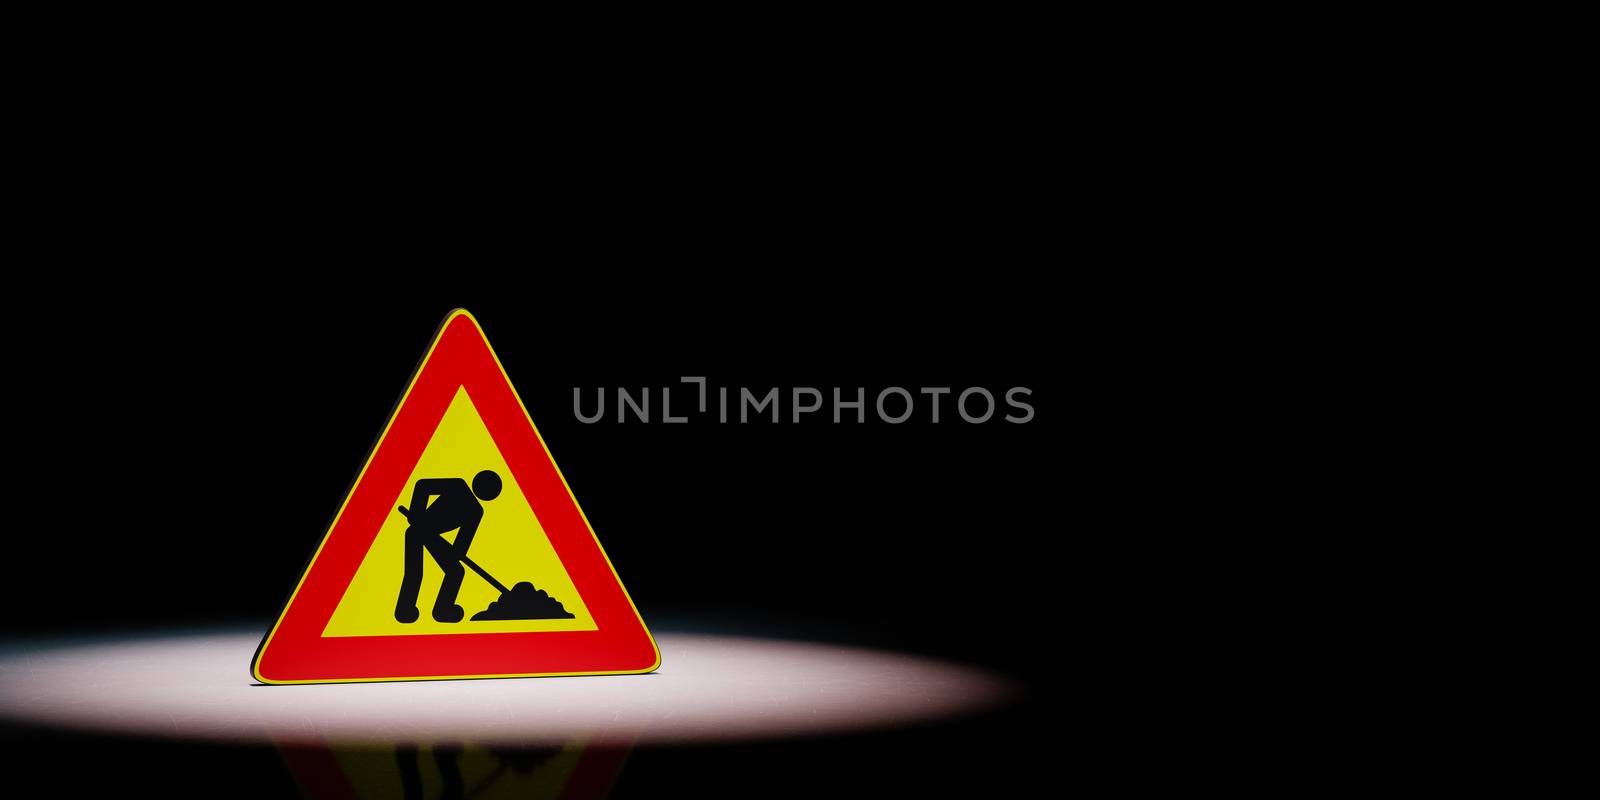 Men at Work Triangle Road-Sign Spotlighted on Black Background by make